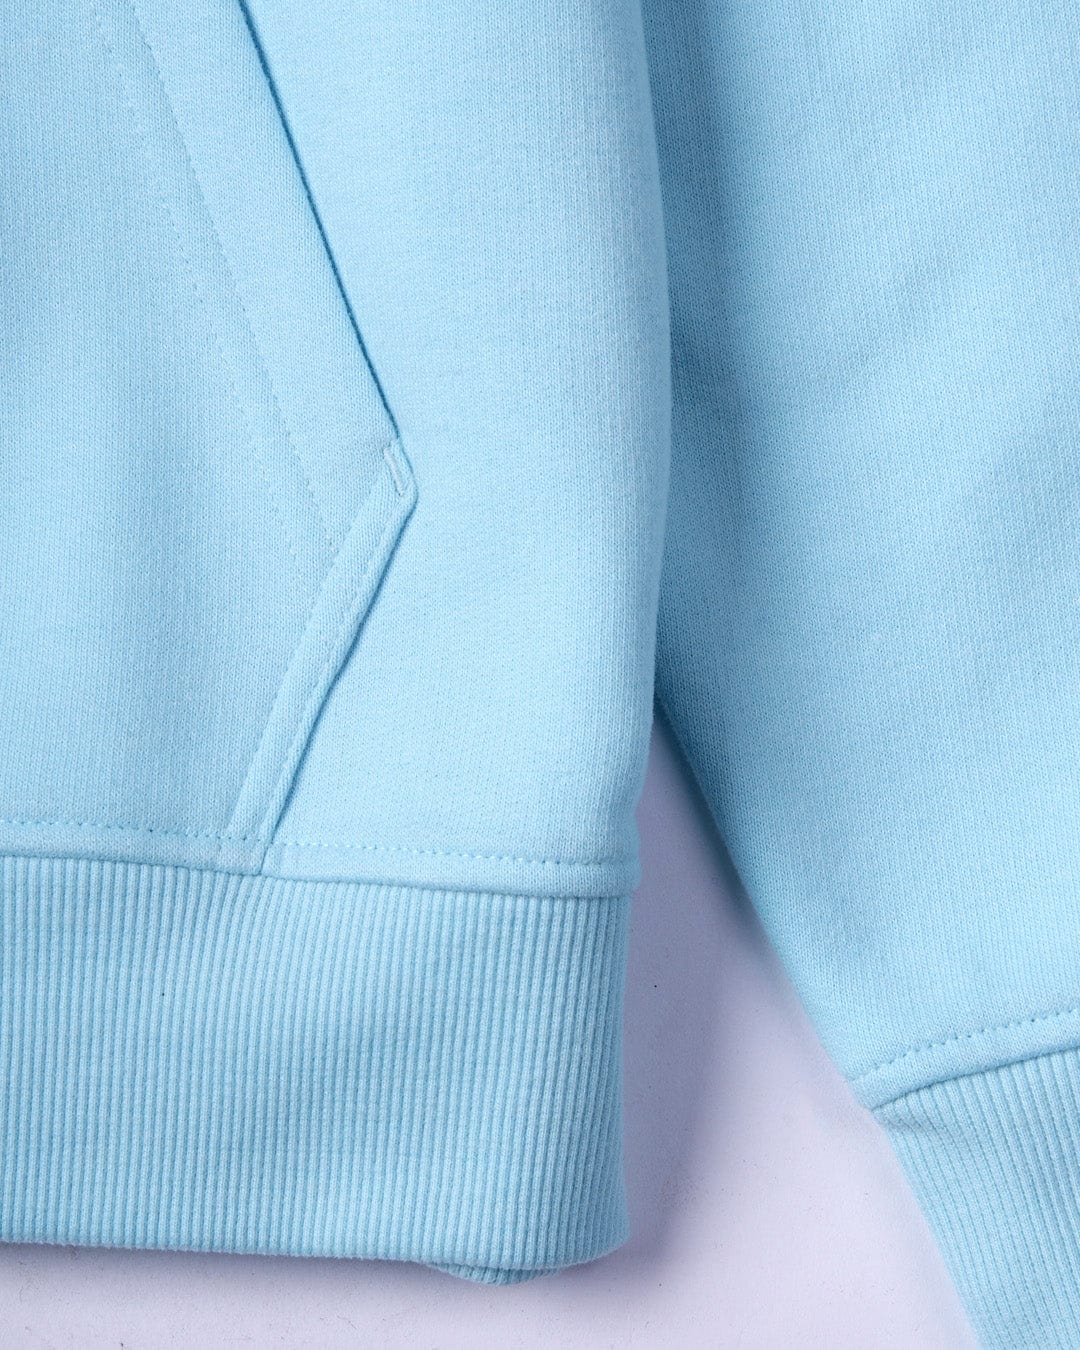 Close-up of a Saltrock Original - Mens Pop Hoodie in Light Blue jersey material with detailed stitching and ribbed cuffs.